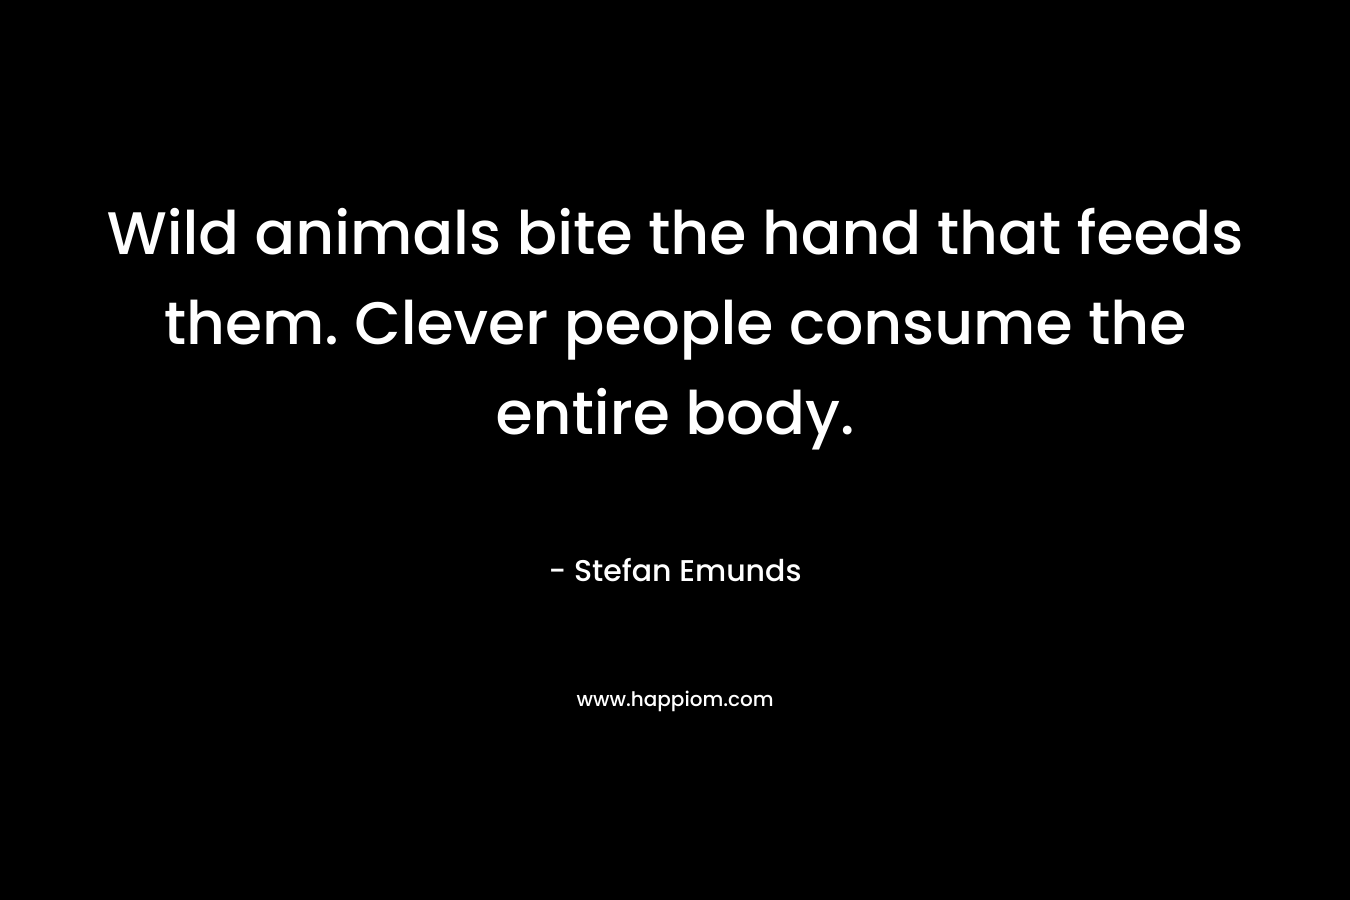 Wild animals bite the hand that feeds them. Clever people consume the entire body.